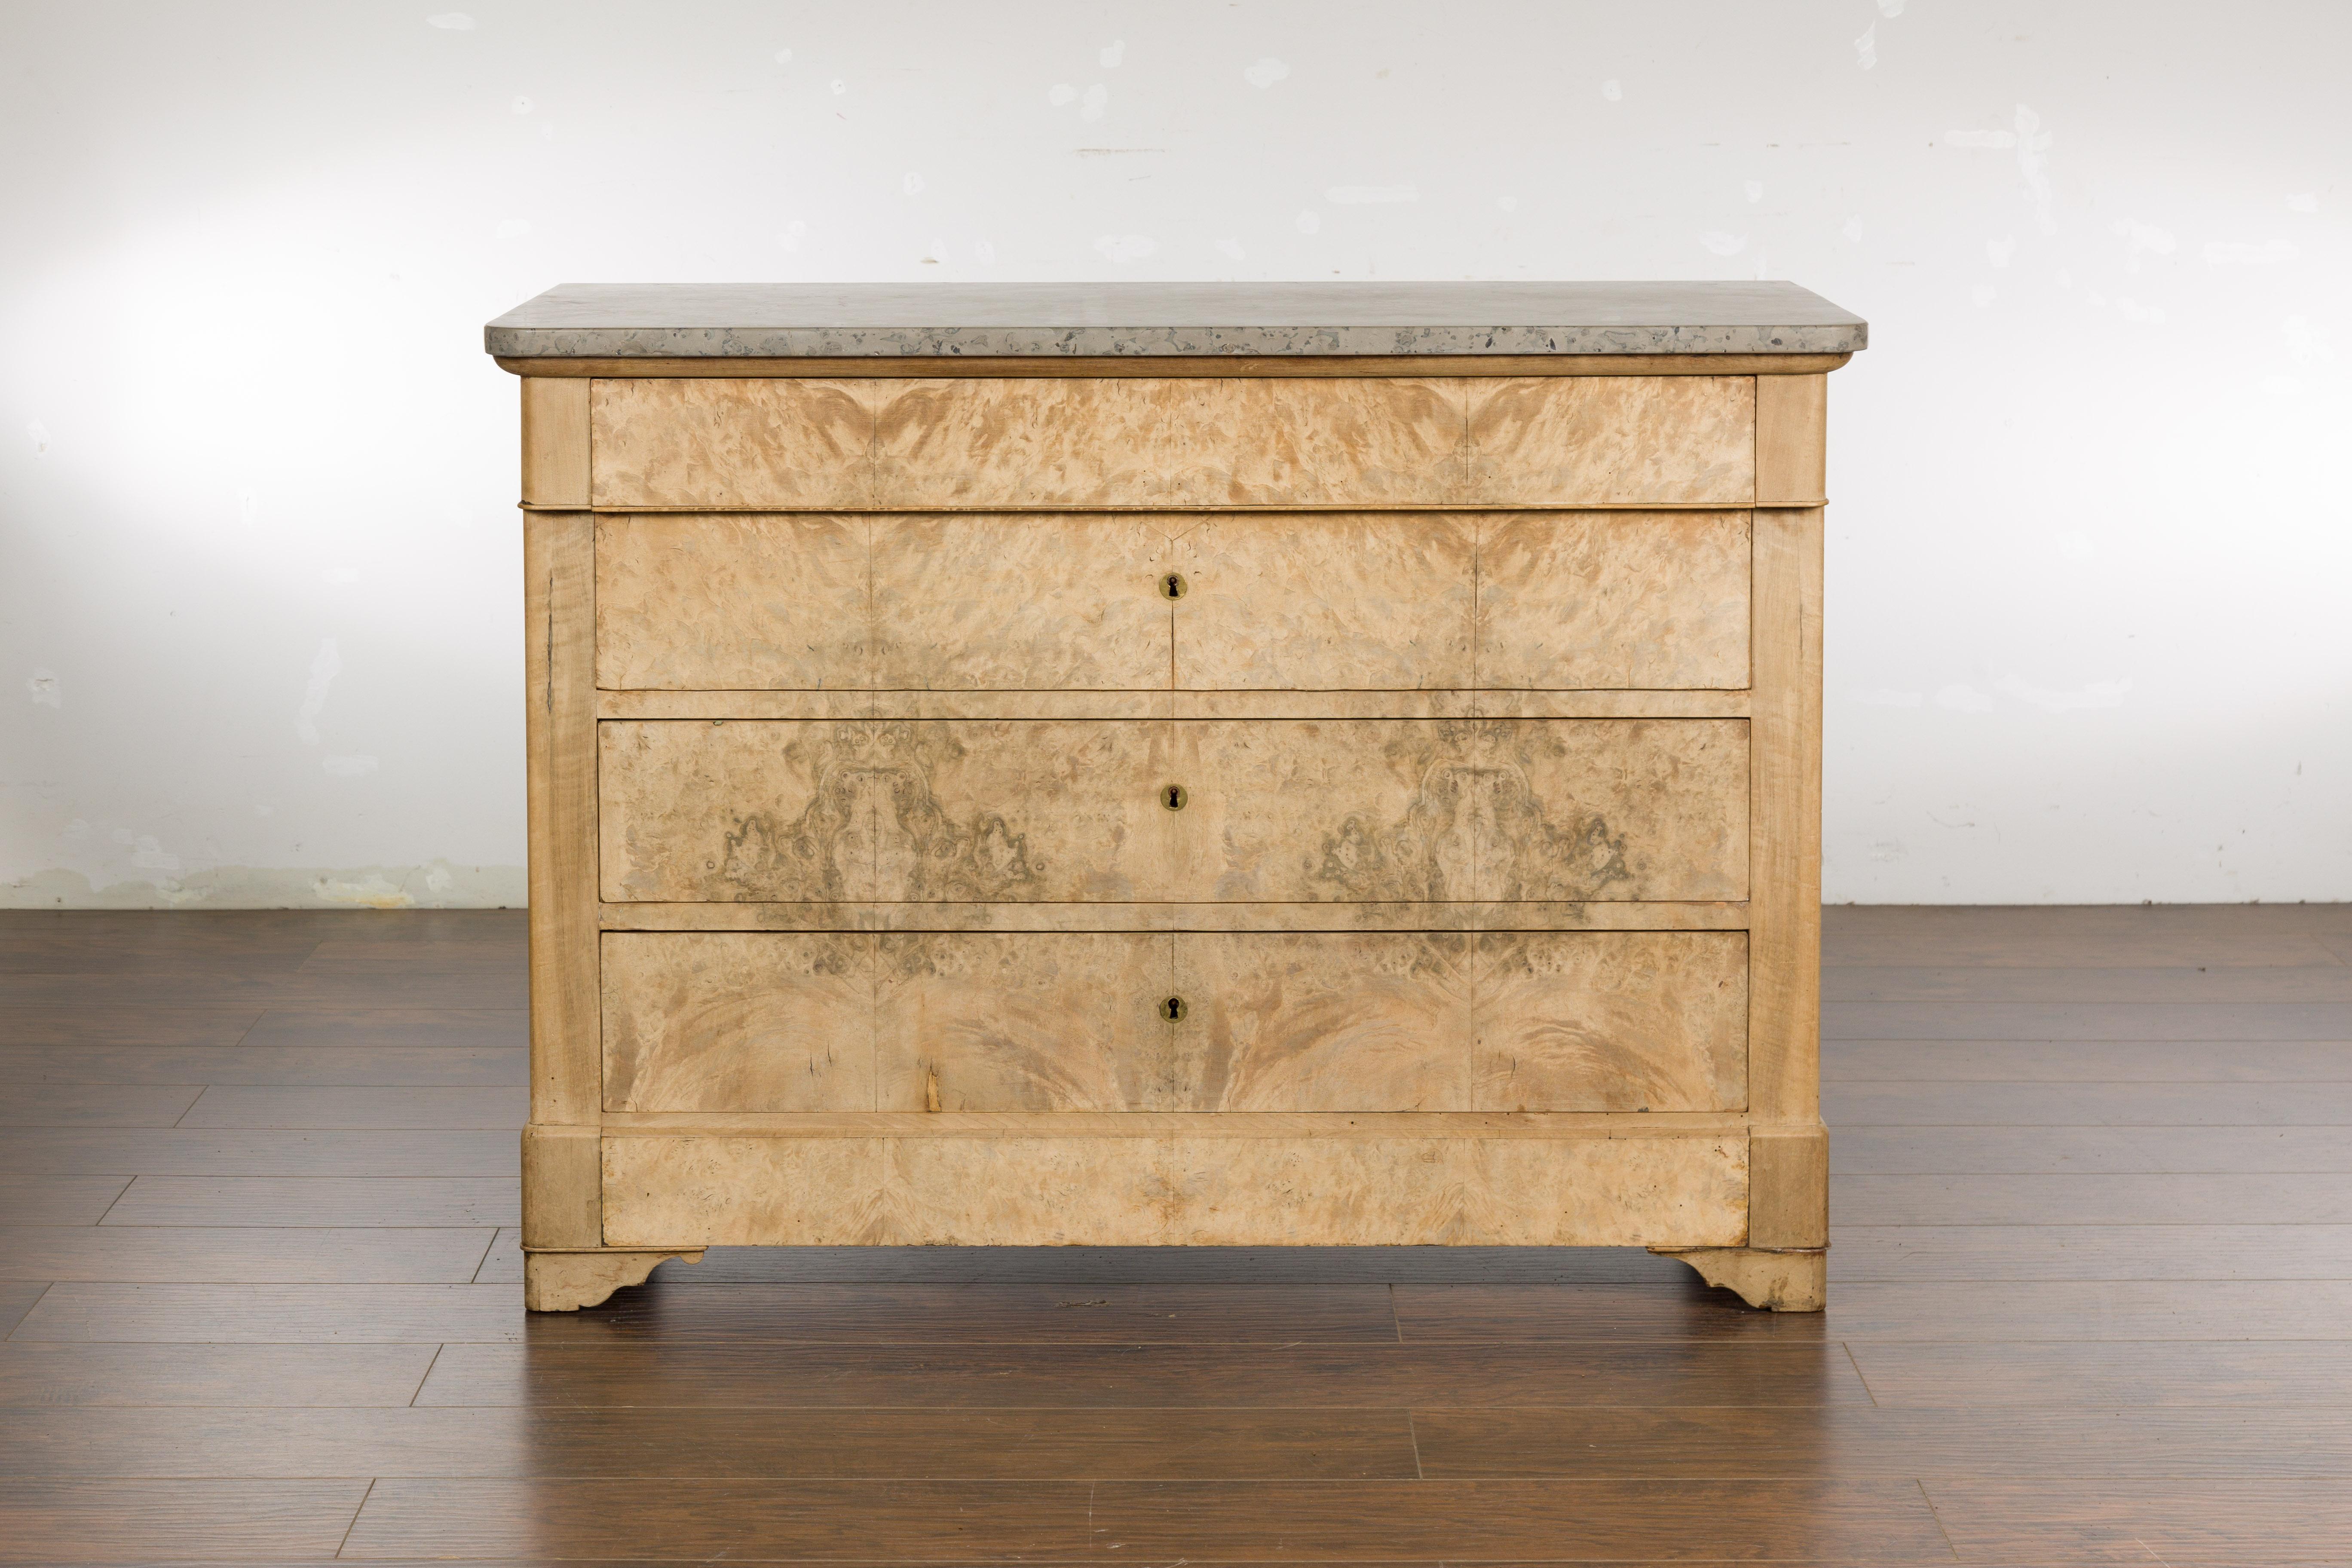 A French Louis-Philippe bleached wood commode from the 19th century with butterfly veneer, marble top and carved bracket feet. Emanating grace and refinement, this French Louis-Philippe bleached wood commode from the 19th century is the epitome of